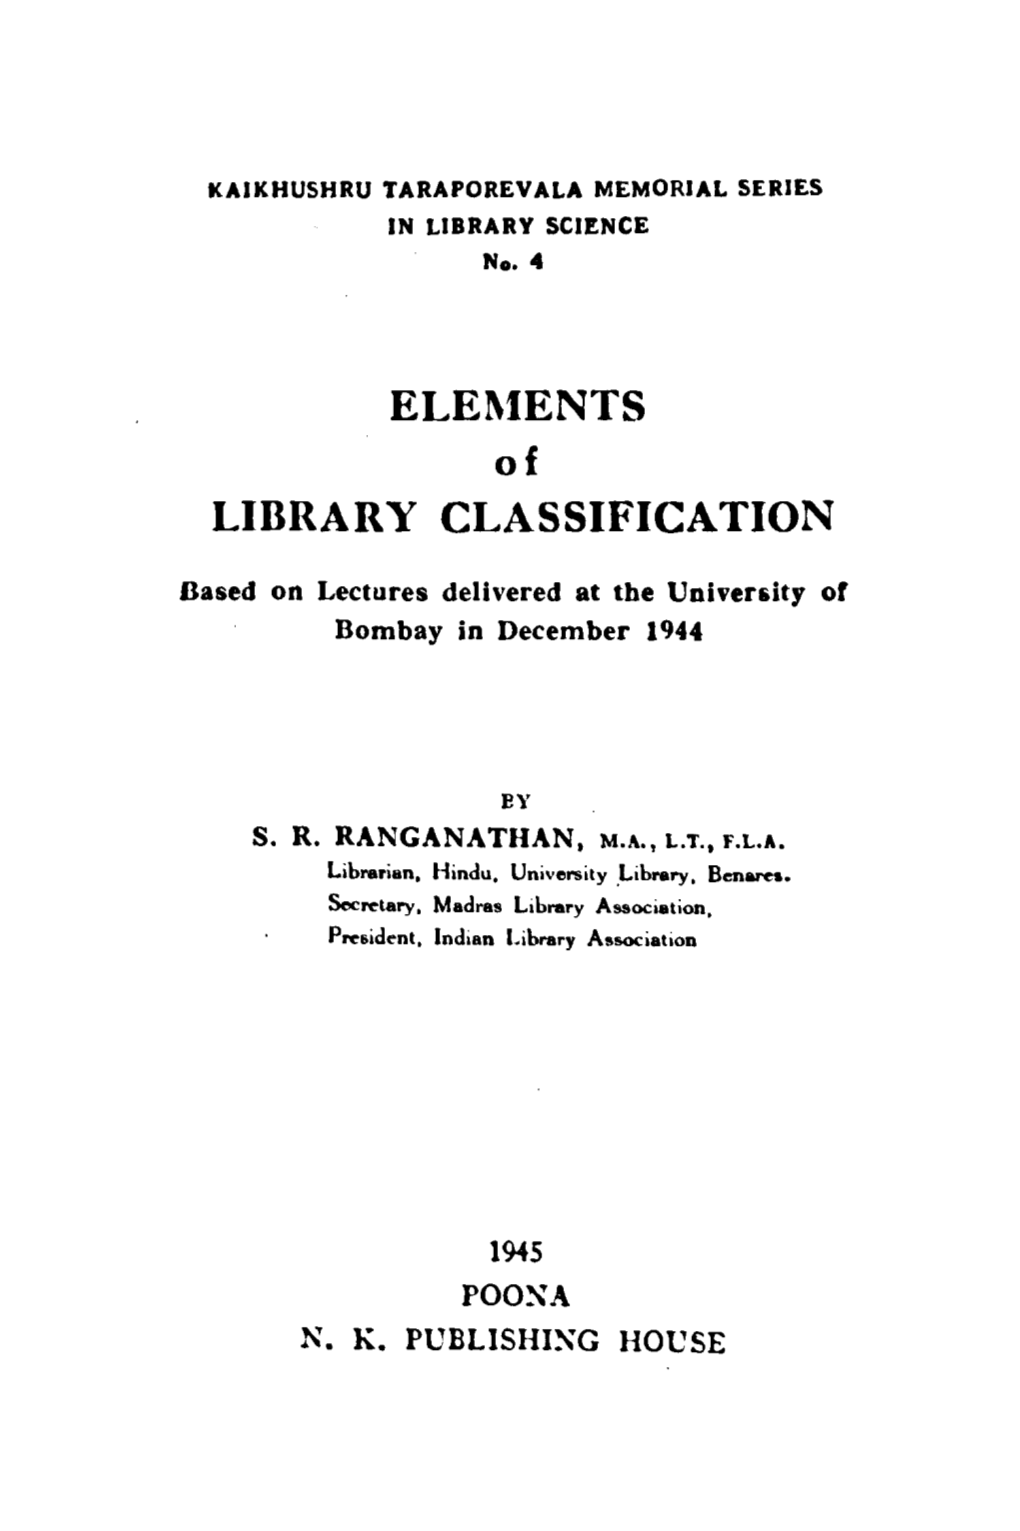 Elel\IENTS LIBRARY CLASSIFICATION